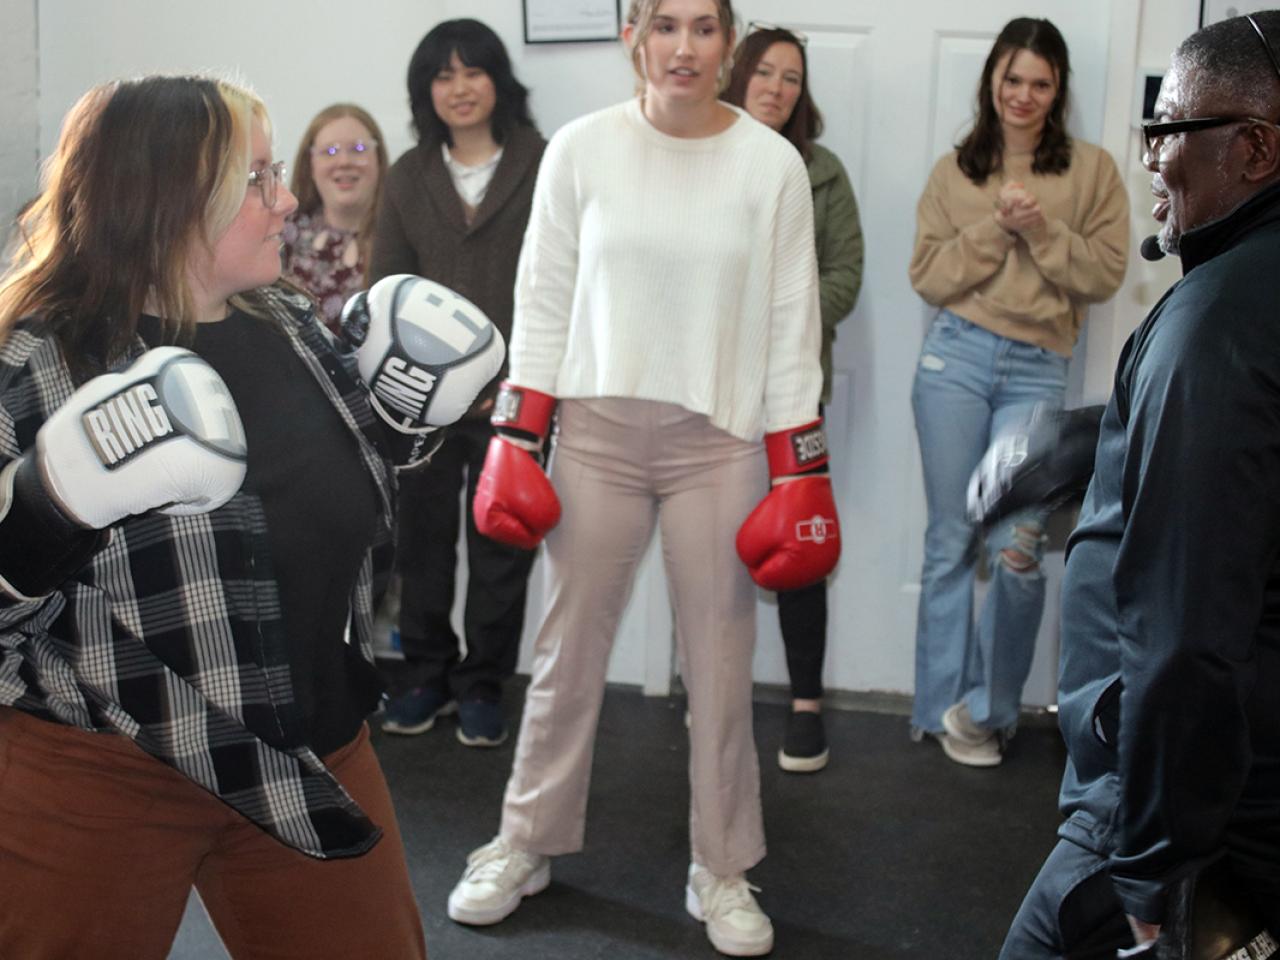 Social work students try out boxing